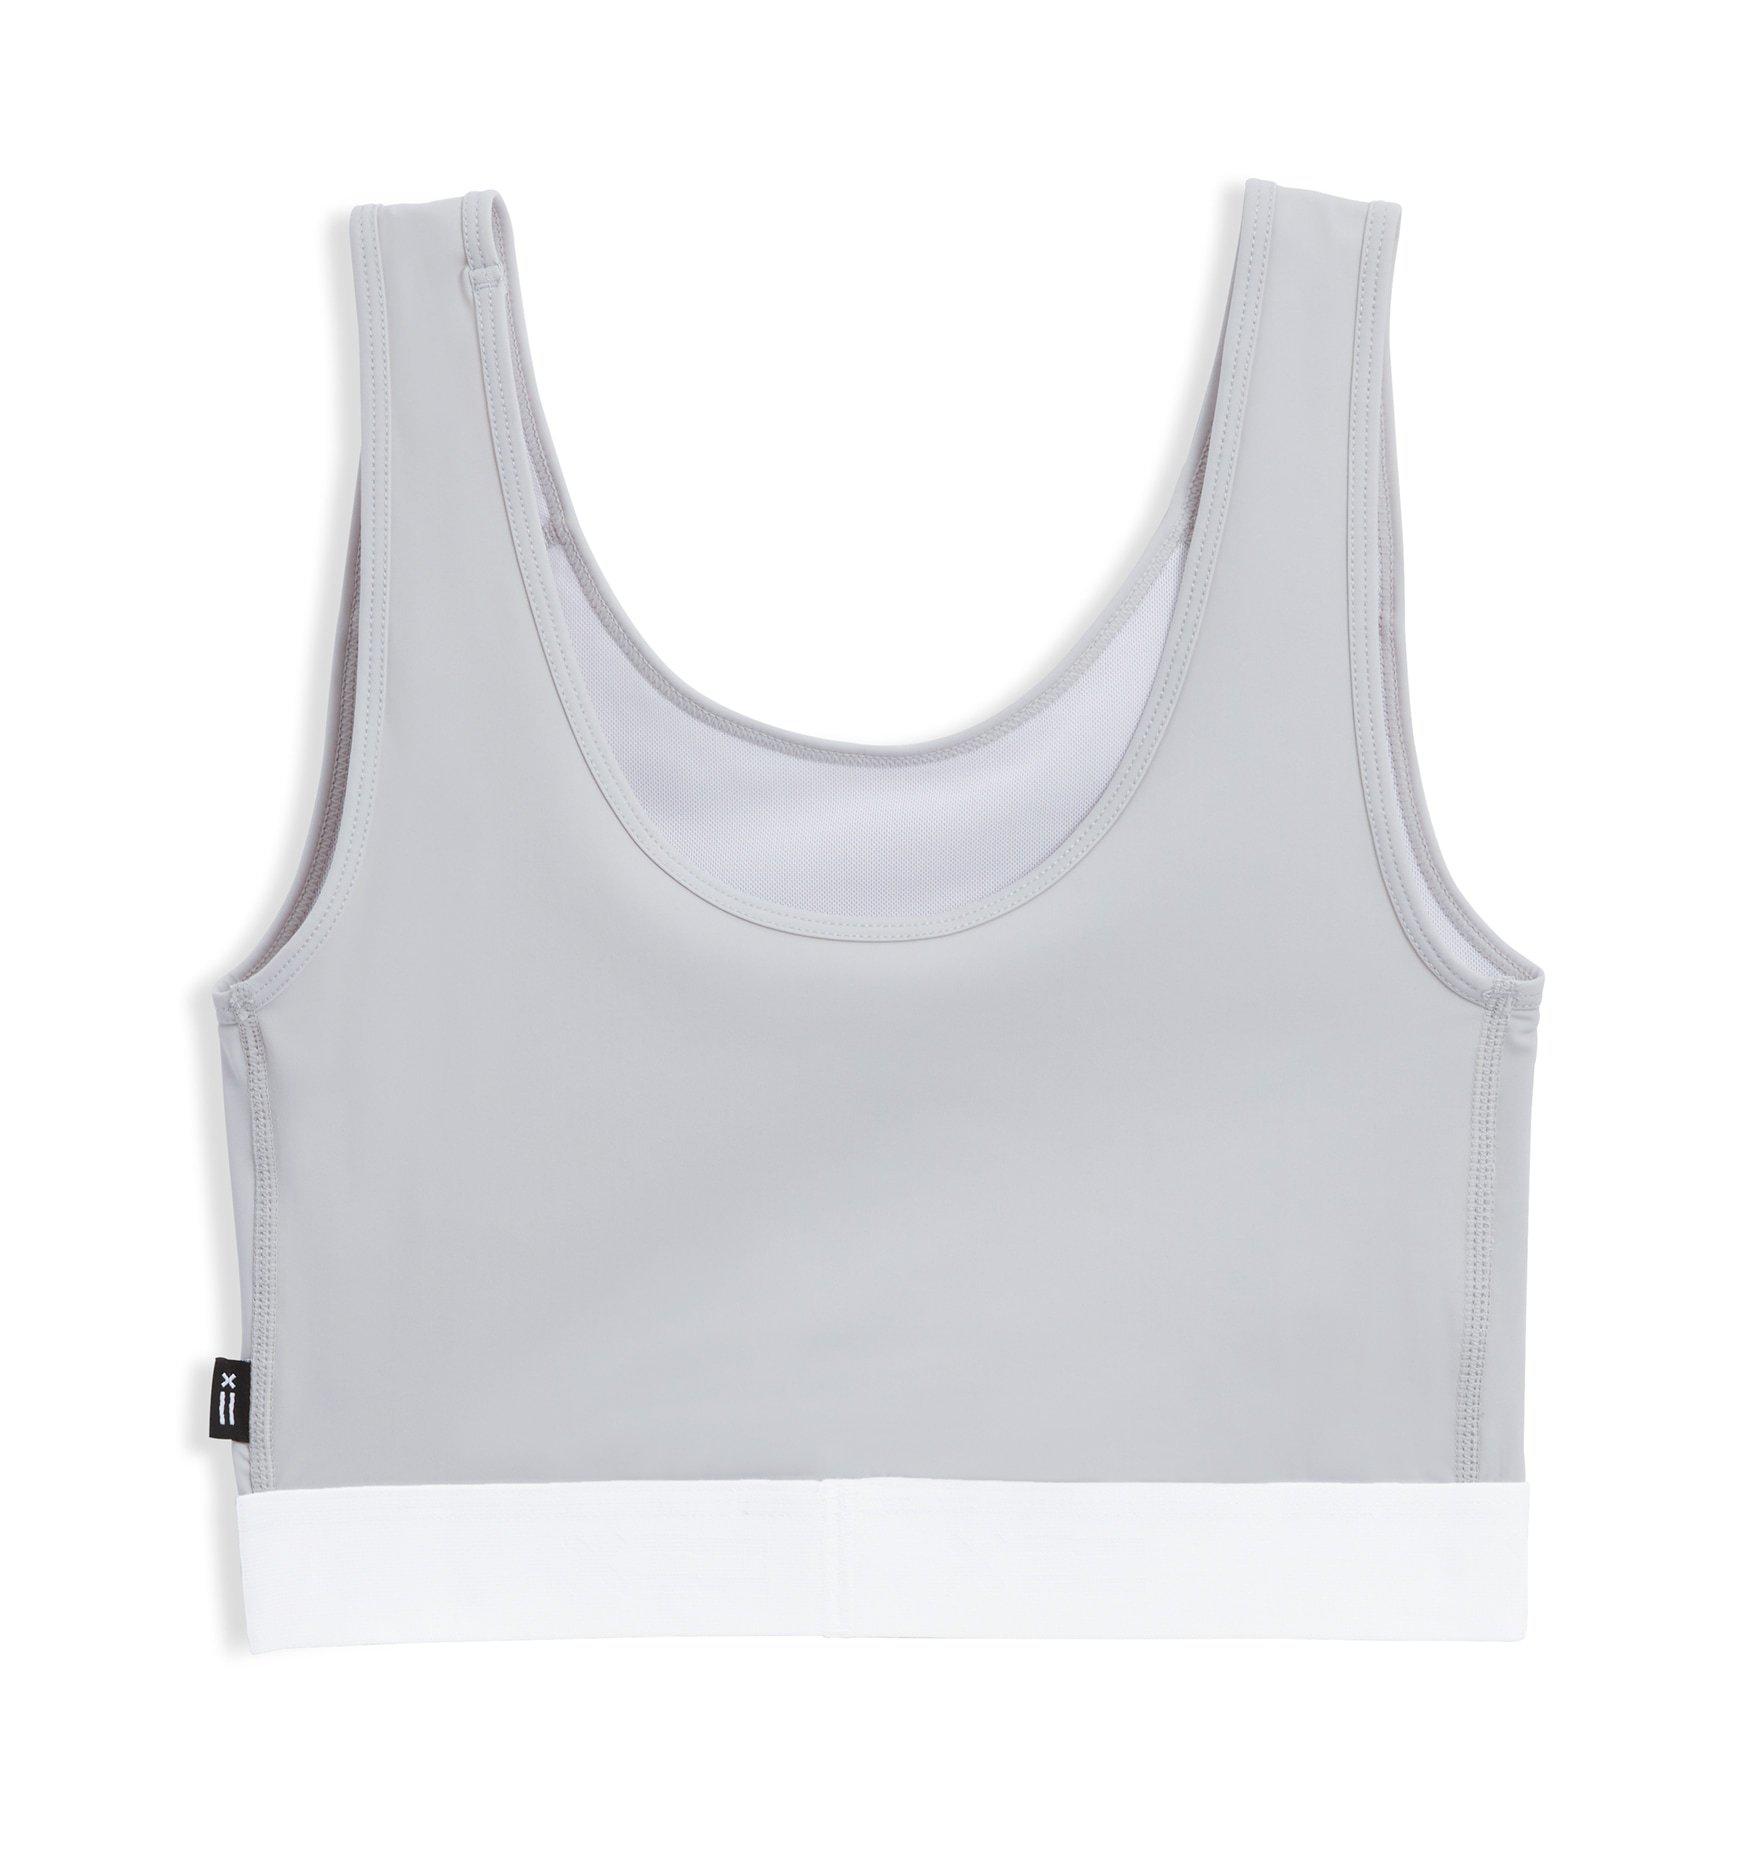 TomboyX Compression Tank, Wireless Full Coverage Medium Support Top,  (XS-6X) Thyme Small